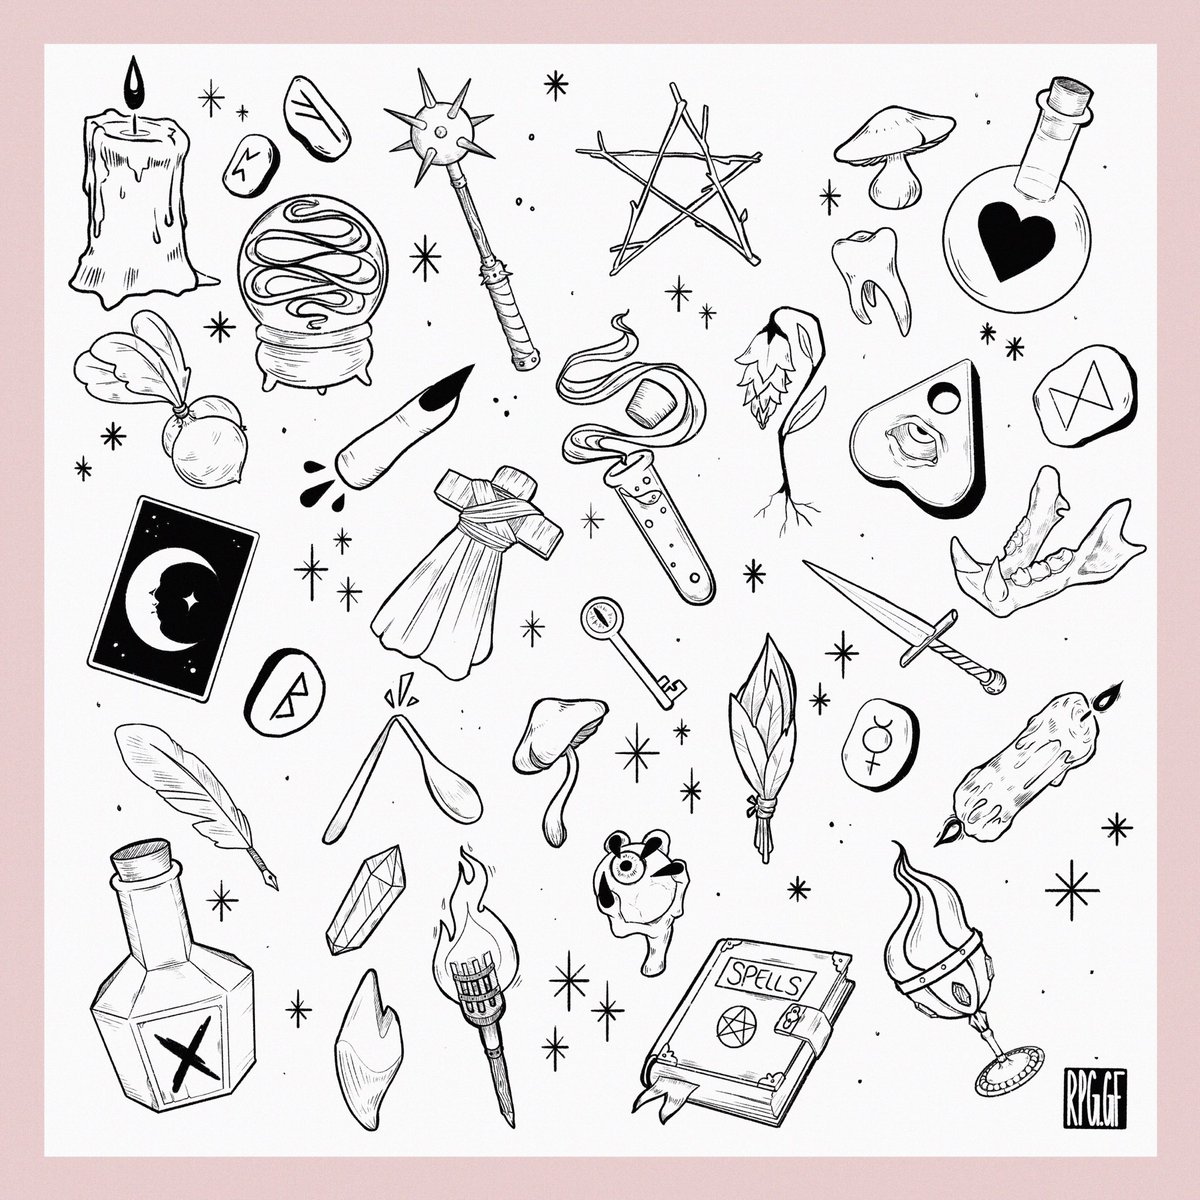 I did another lil tattoo sheet! Much smaller designs this time 🗡✨ it was a lot of fun for me to do a bunch of little designs instead of a whole illustration for once, and I’d like to continue to do it! 🖤 #flashsheet #sticknpoke